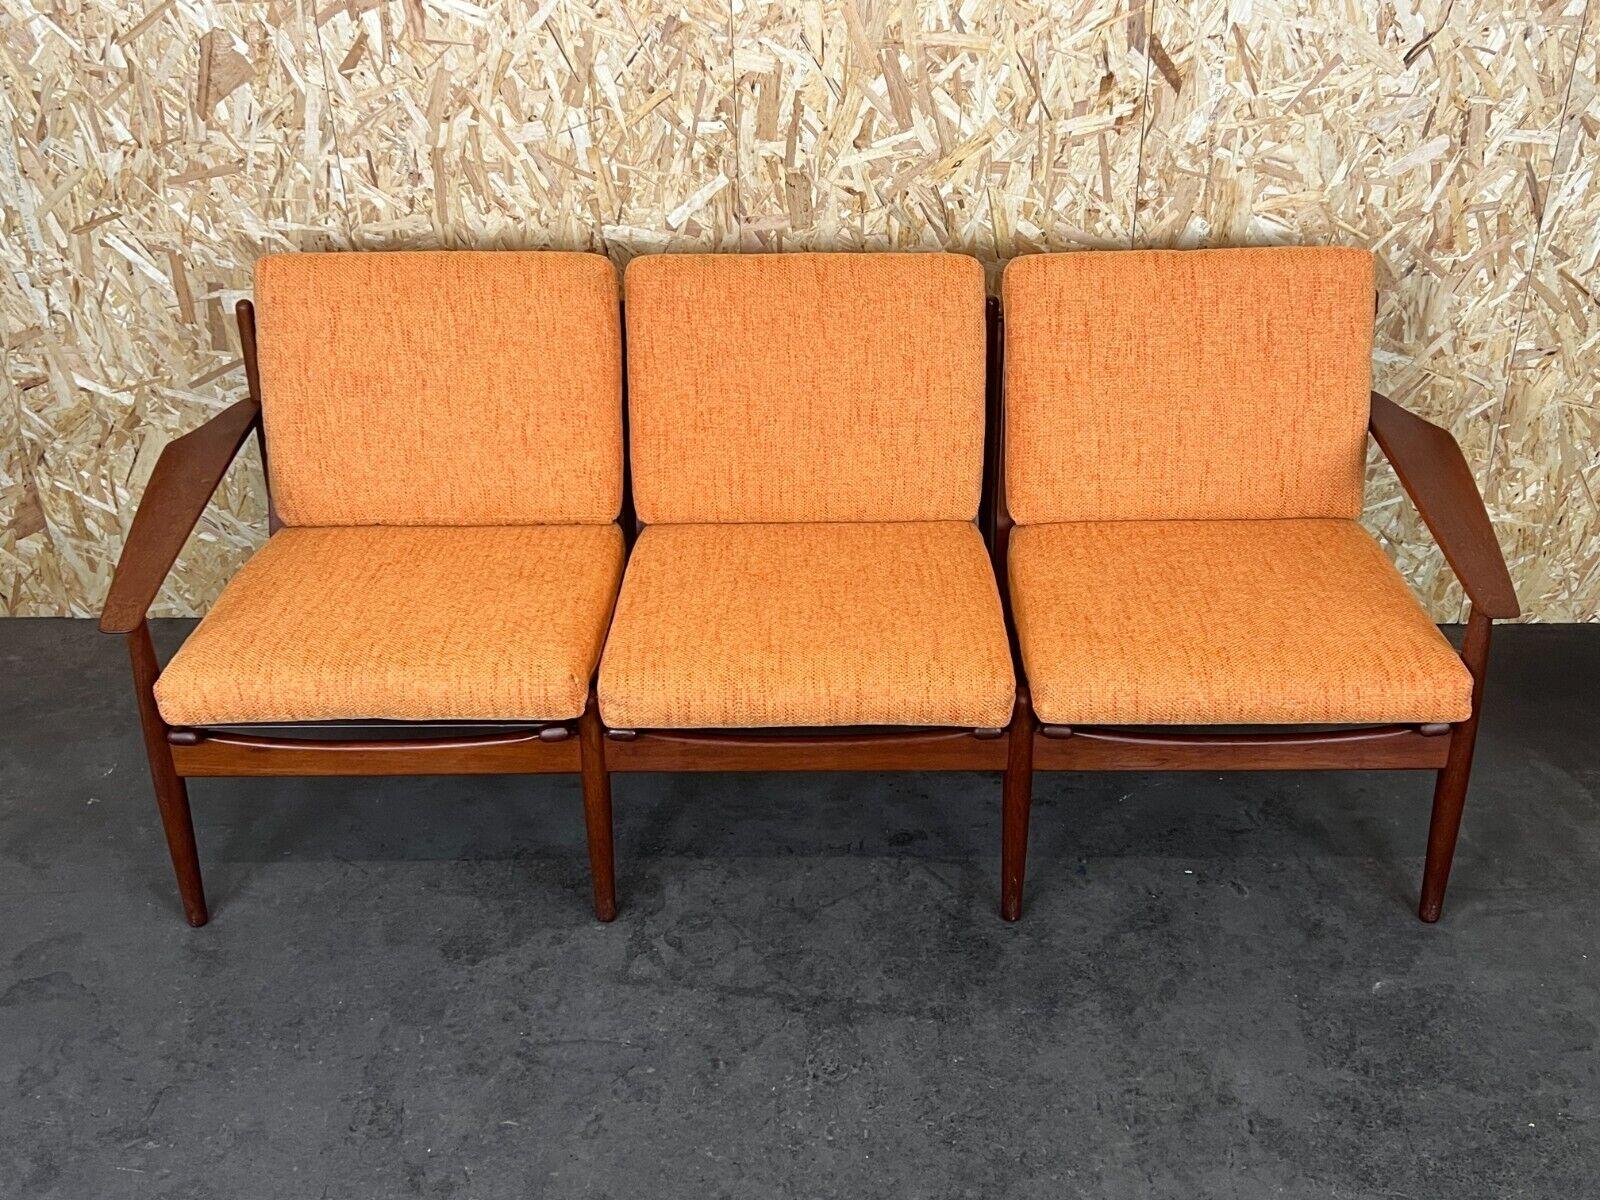 60s 70s teak sofa couch 3-seater Svend Aage Eriksen for Glostrup Danish Design 60s

Object: sofa

Manufacturer: Glostrup

Condition: good

Age: around 1960-1970

Dimensions:

190cm x 77cm x 77cm
Seat height = 43cm

Other notes:

The pictures serve